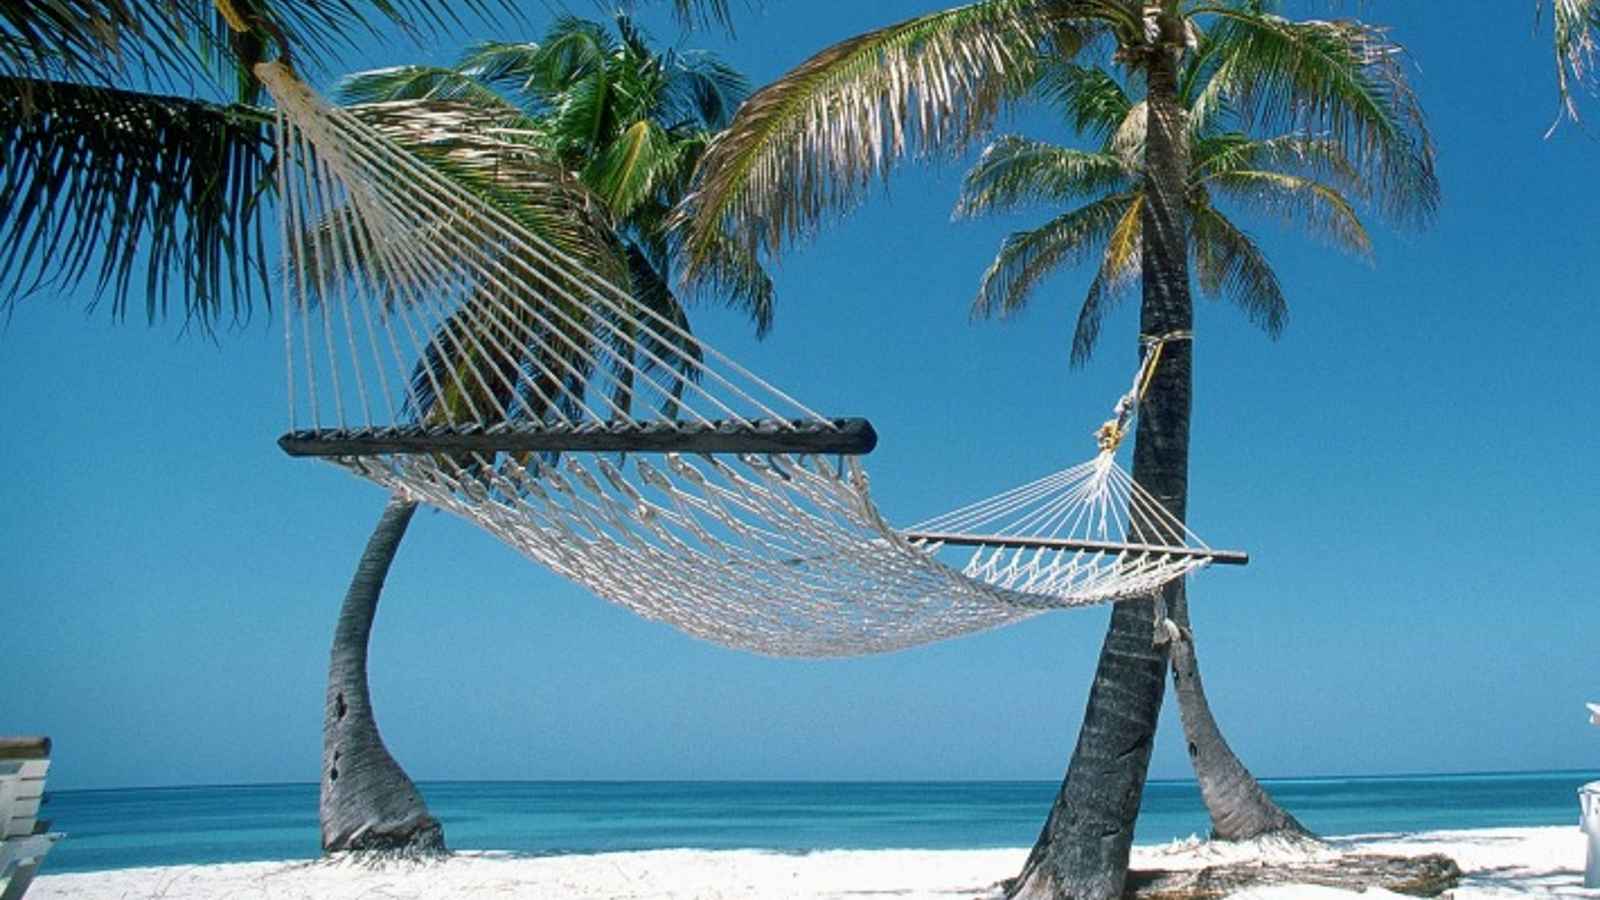 National Hammock Day 2023: Date, History, Facts about Hammocks